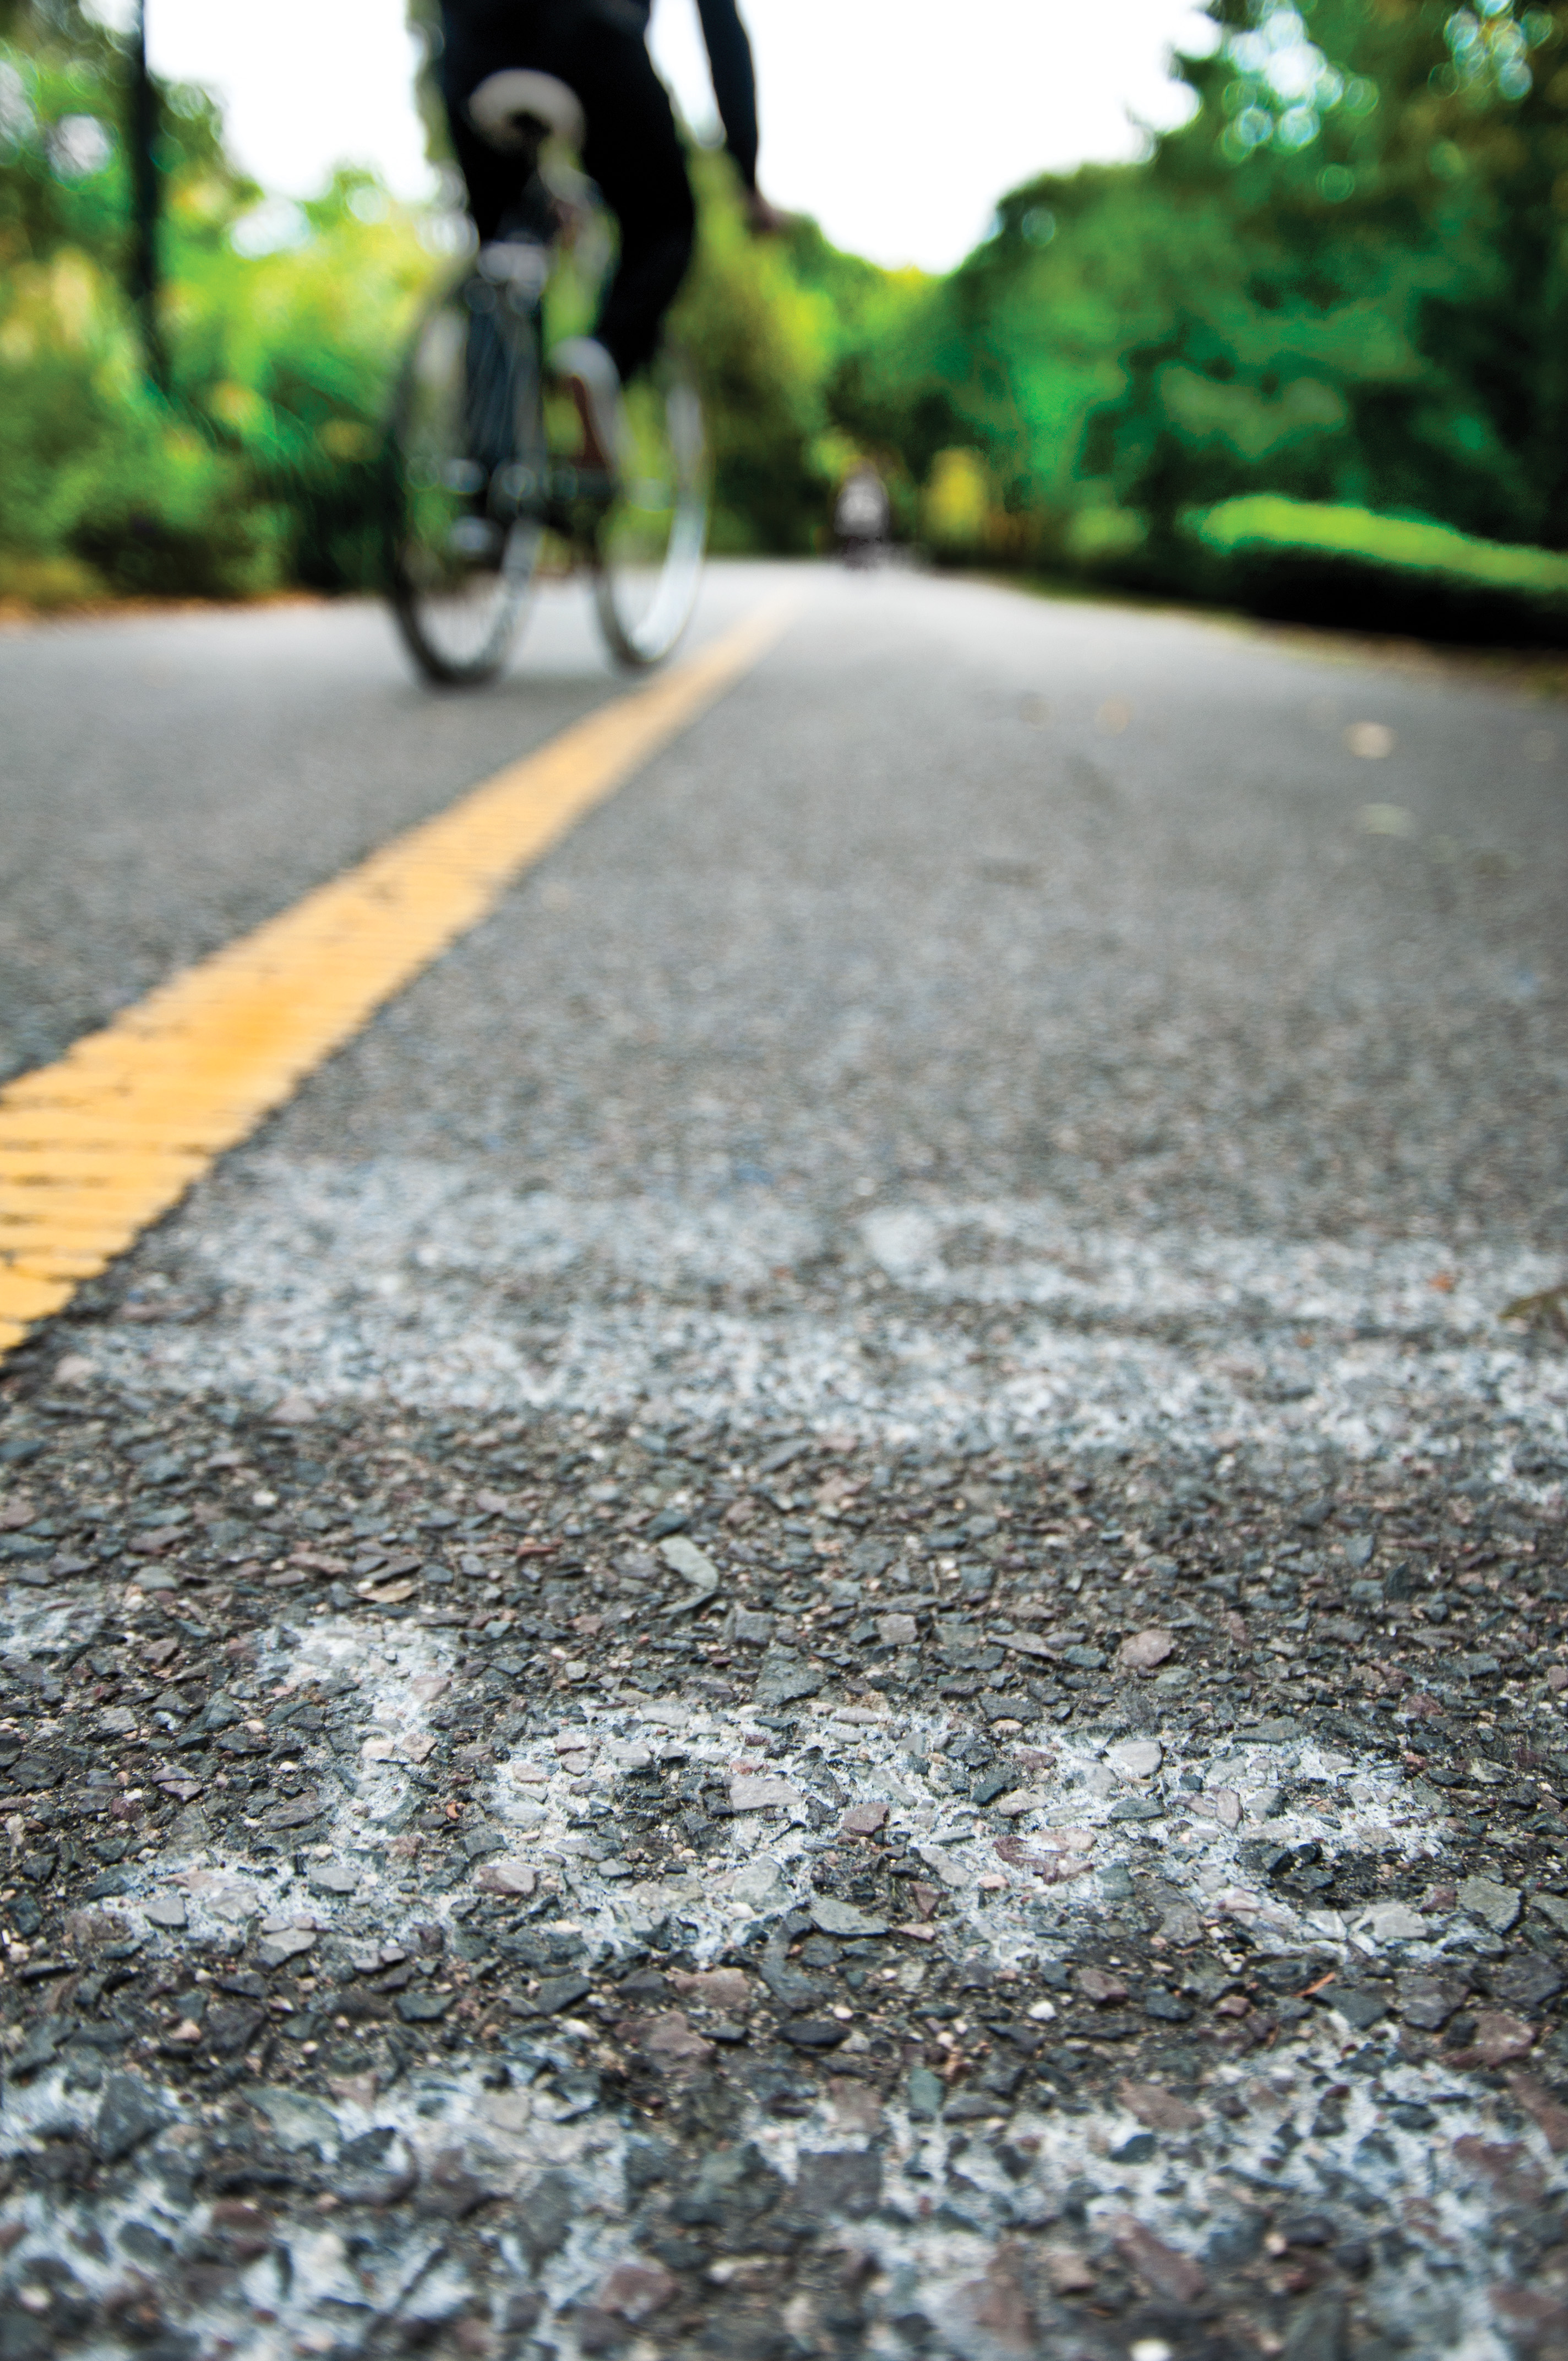 the word 'love', amongst other words that are cropped from the image, are painted on an actively used bike path on a nice summer day